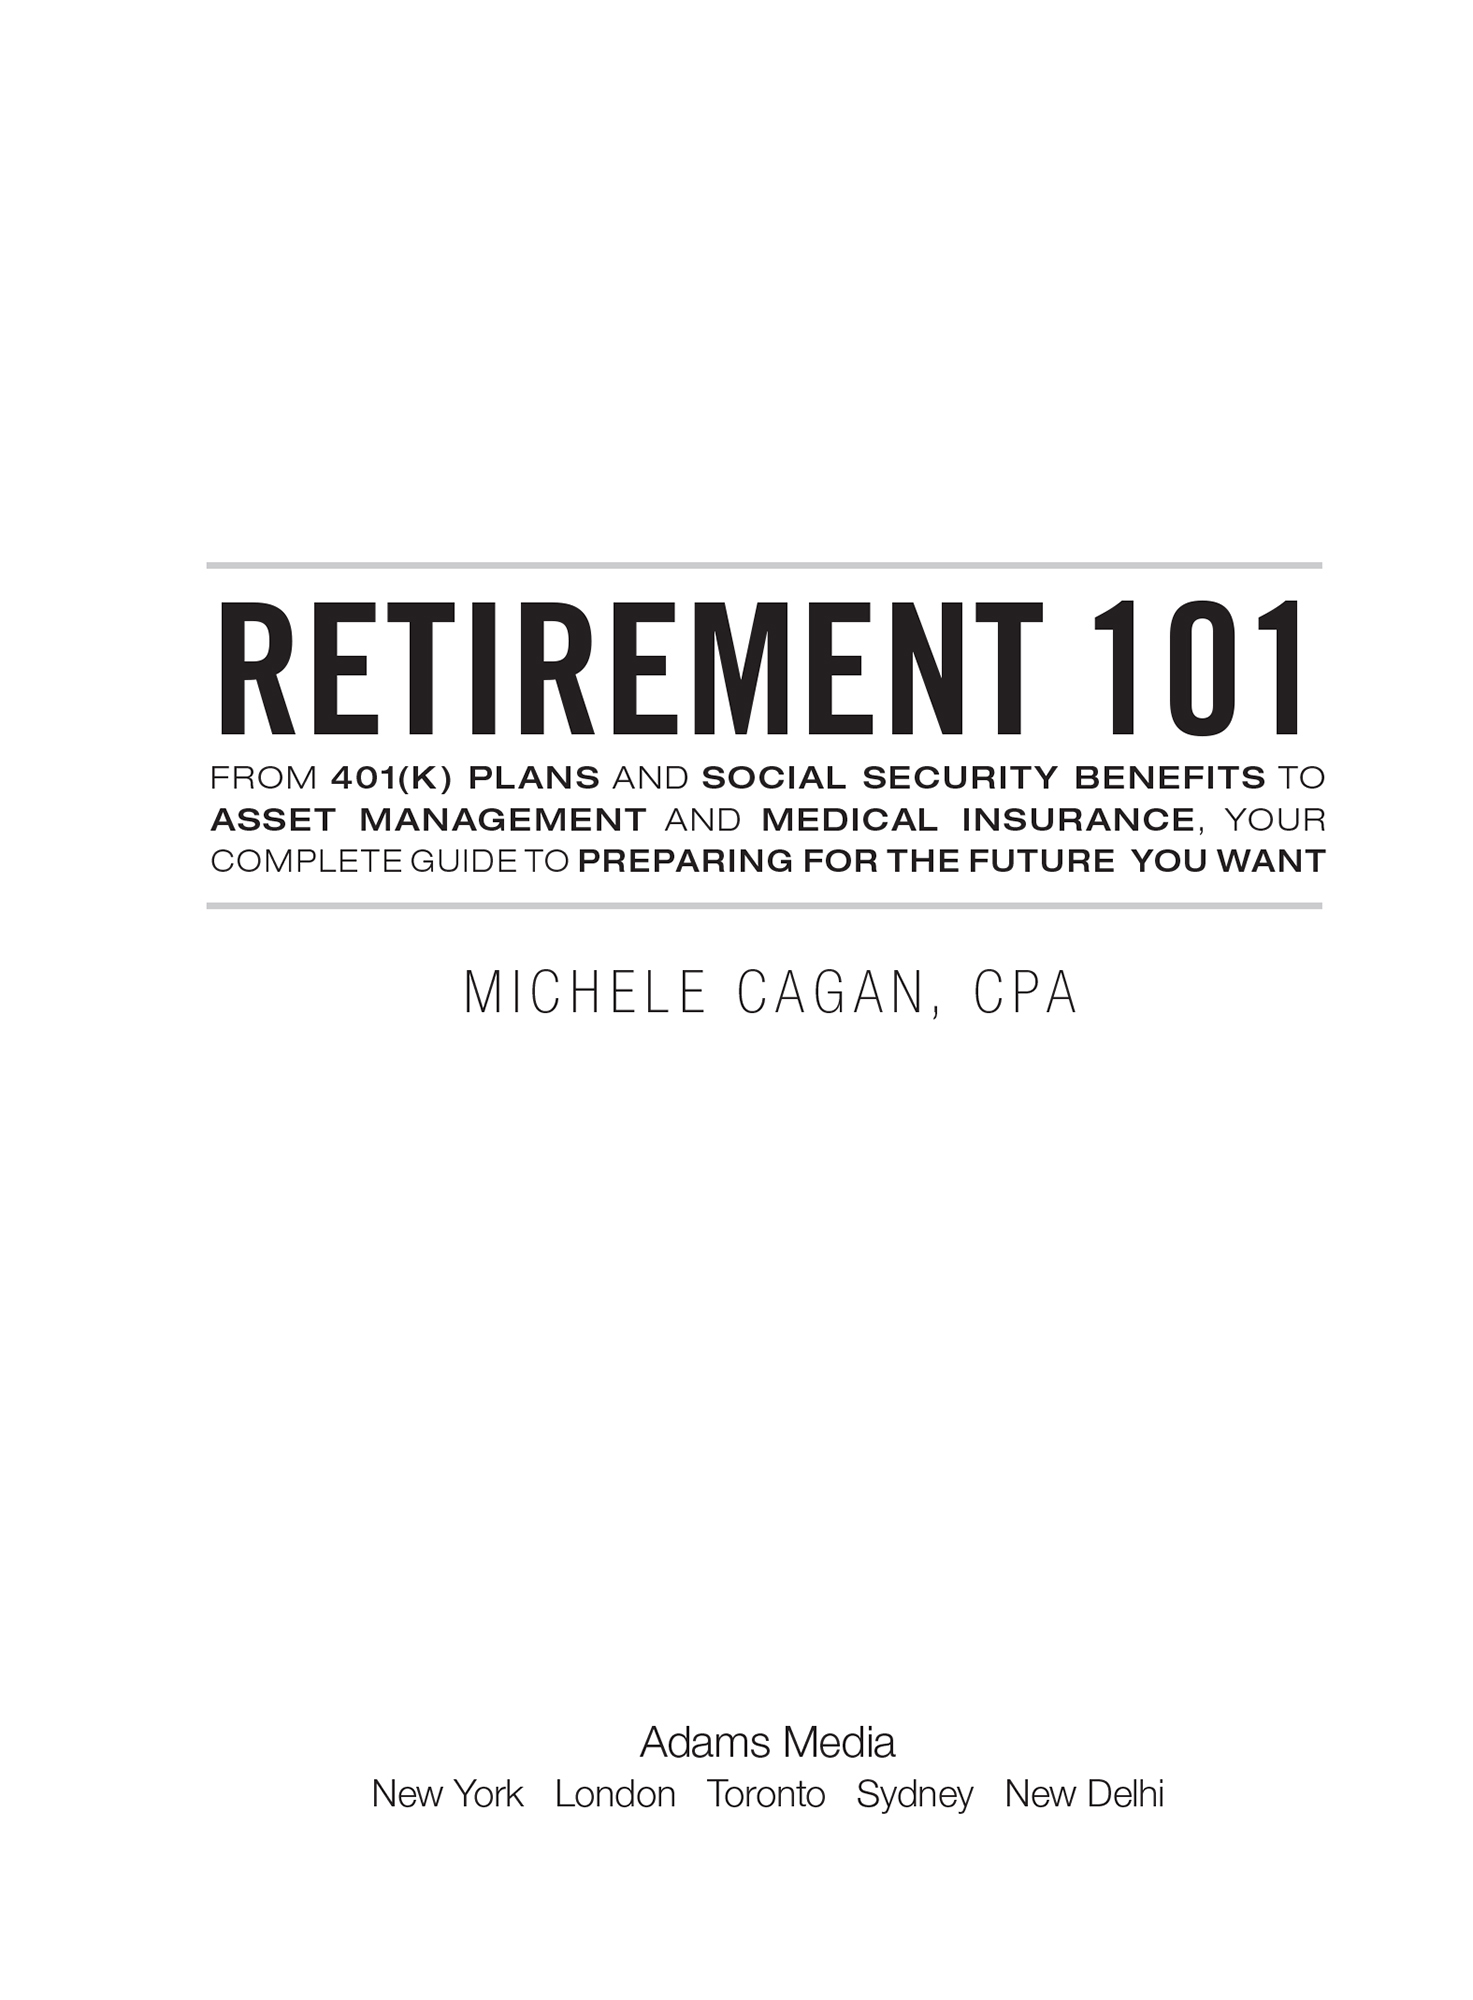 Retirement 101 From 401k Plans and Social Security Benefits to Asset Management and Medical Insurance Your Complete Guide to Preparing for the Future You Want - image 2